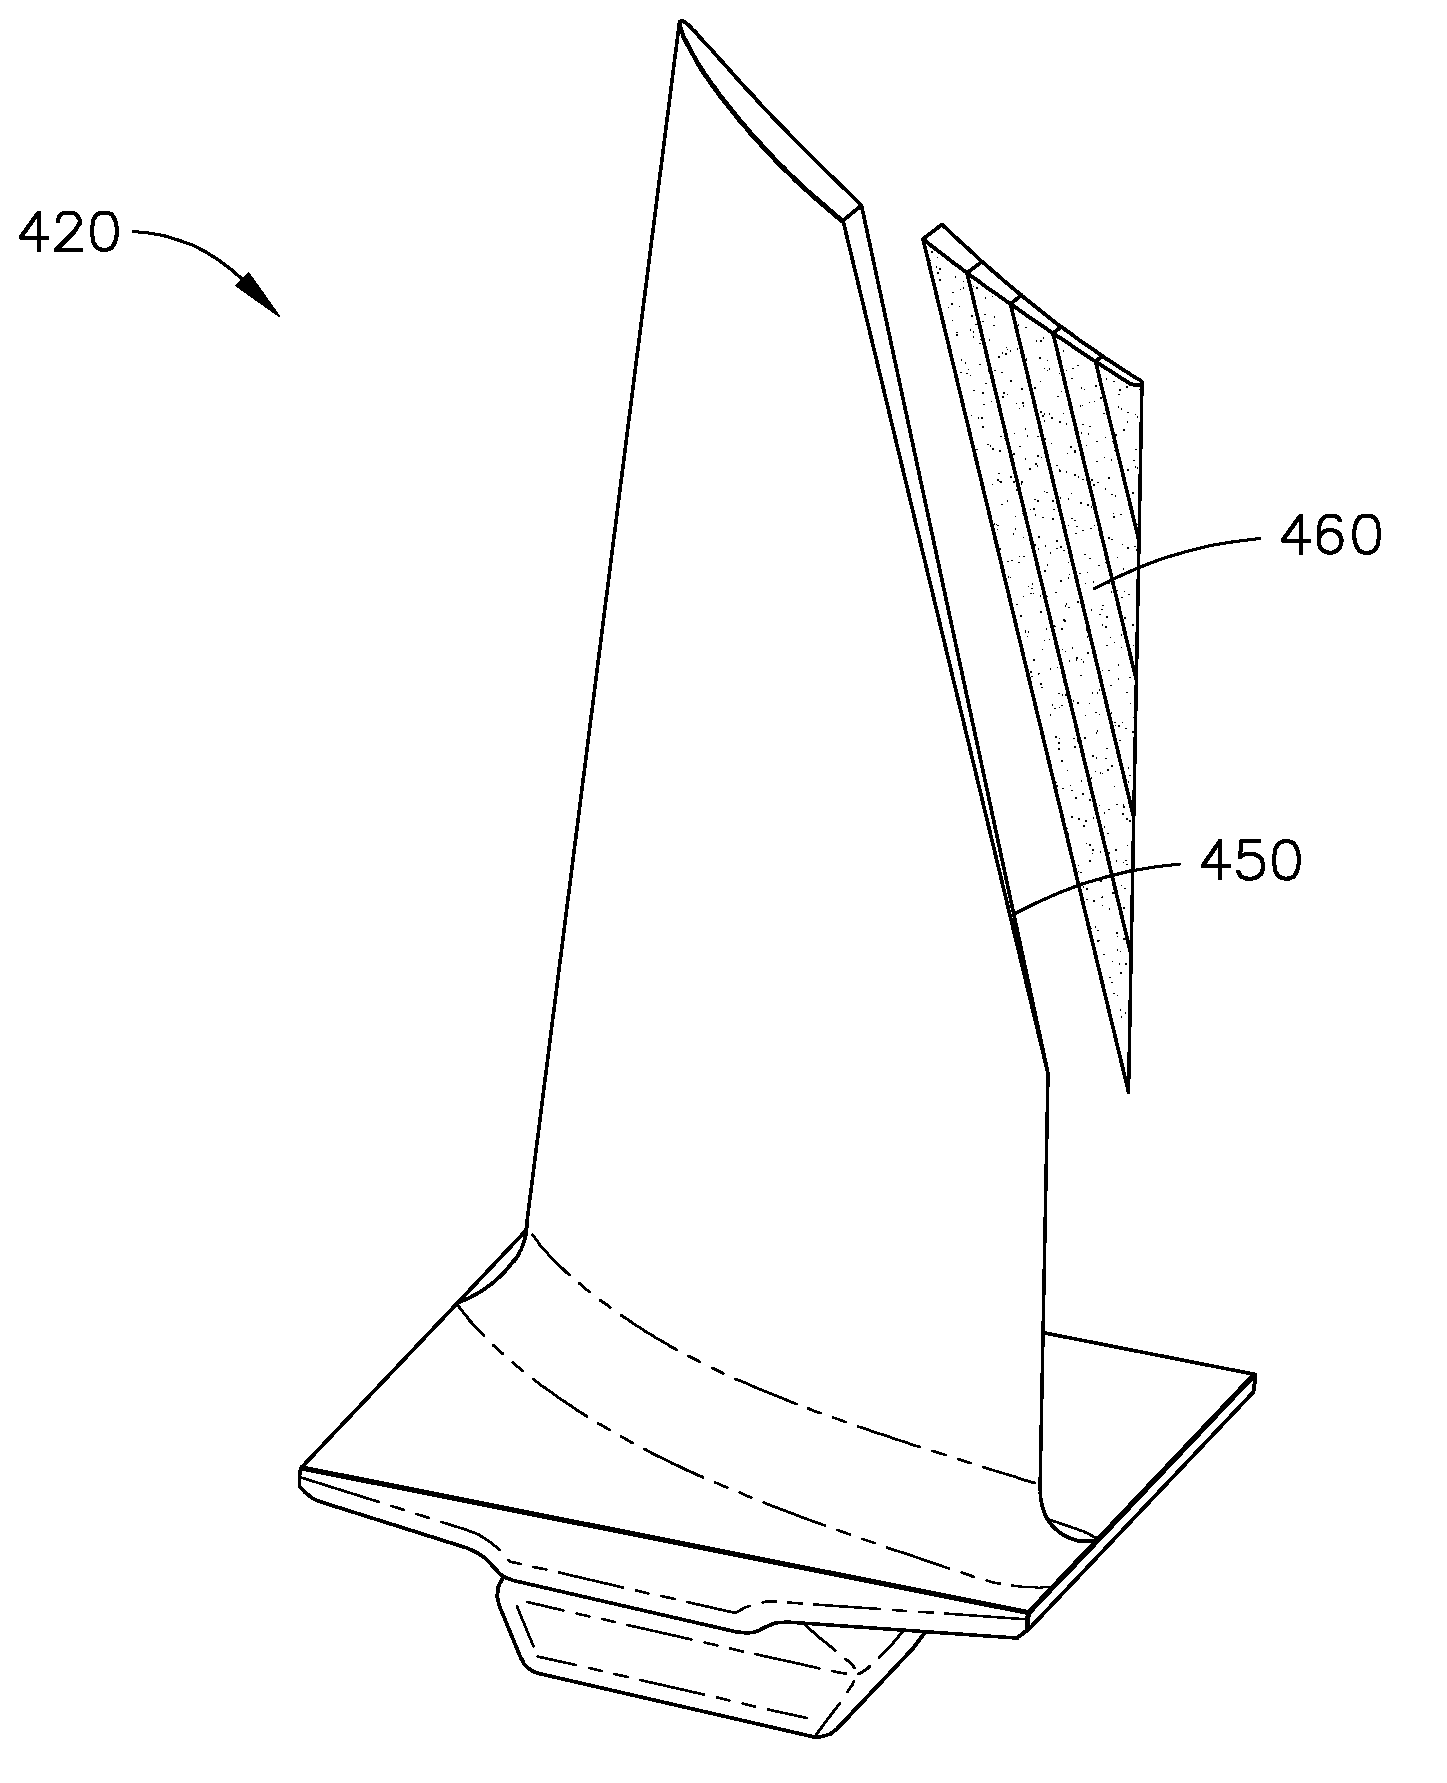 Laser net shape manufacturing using an adaptive toolpath deposition method